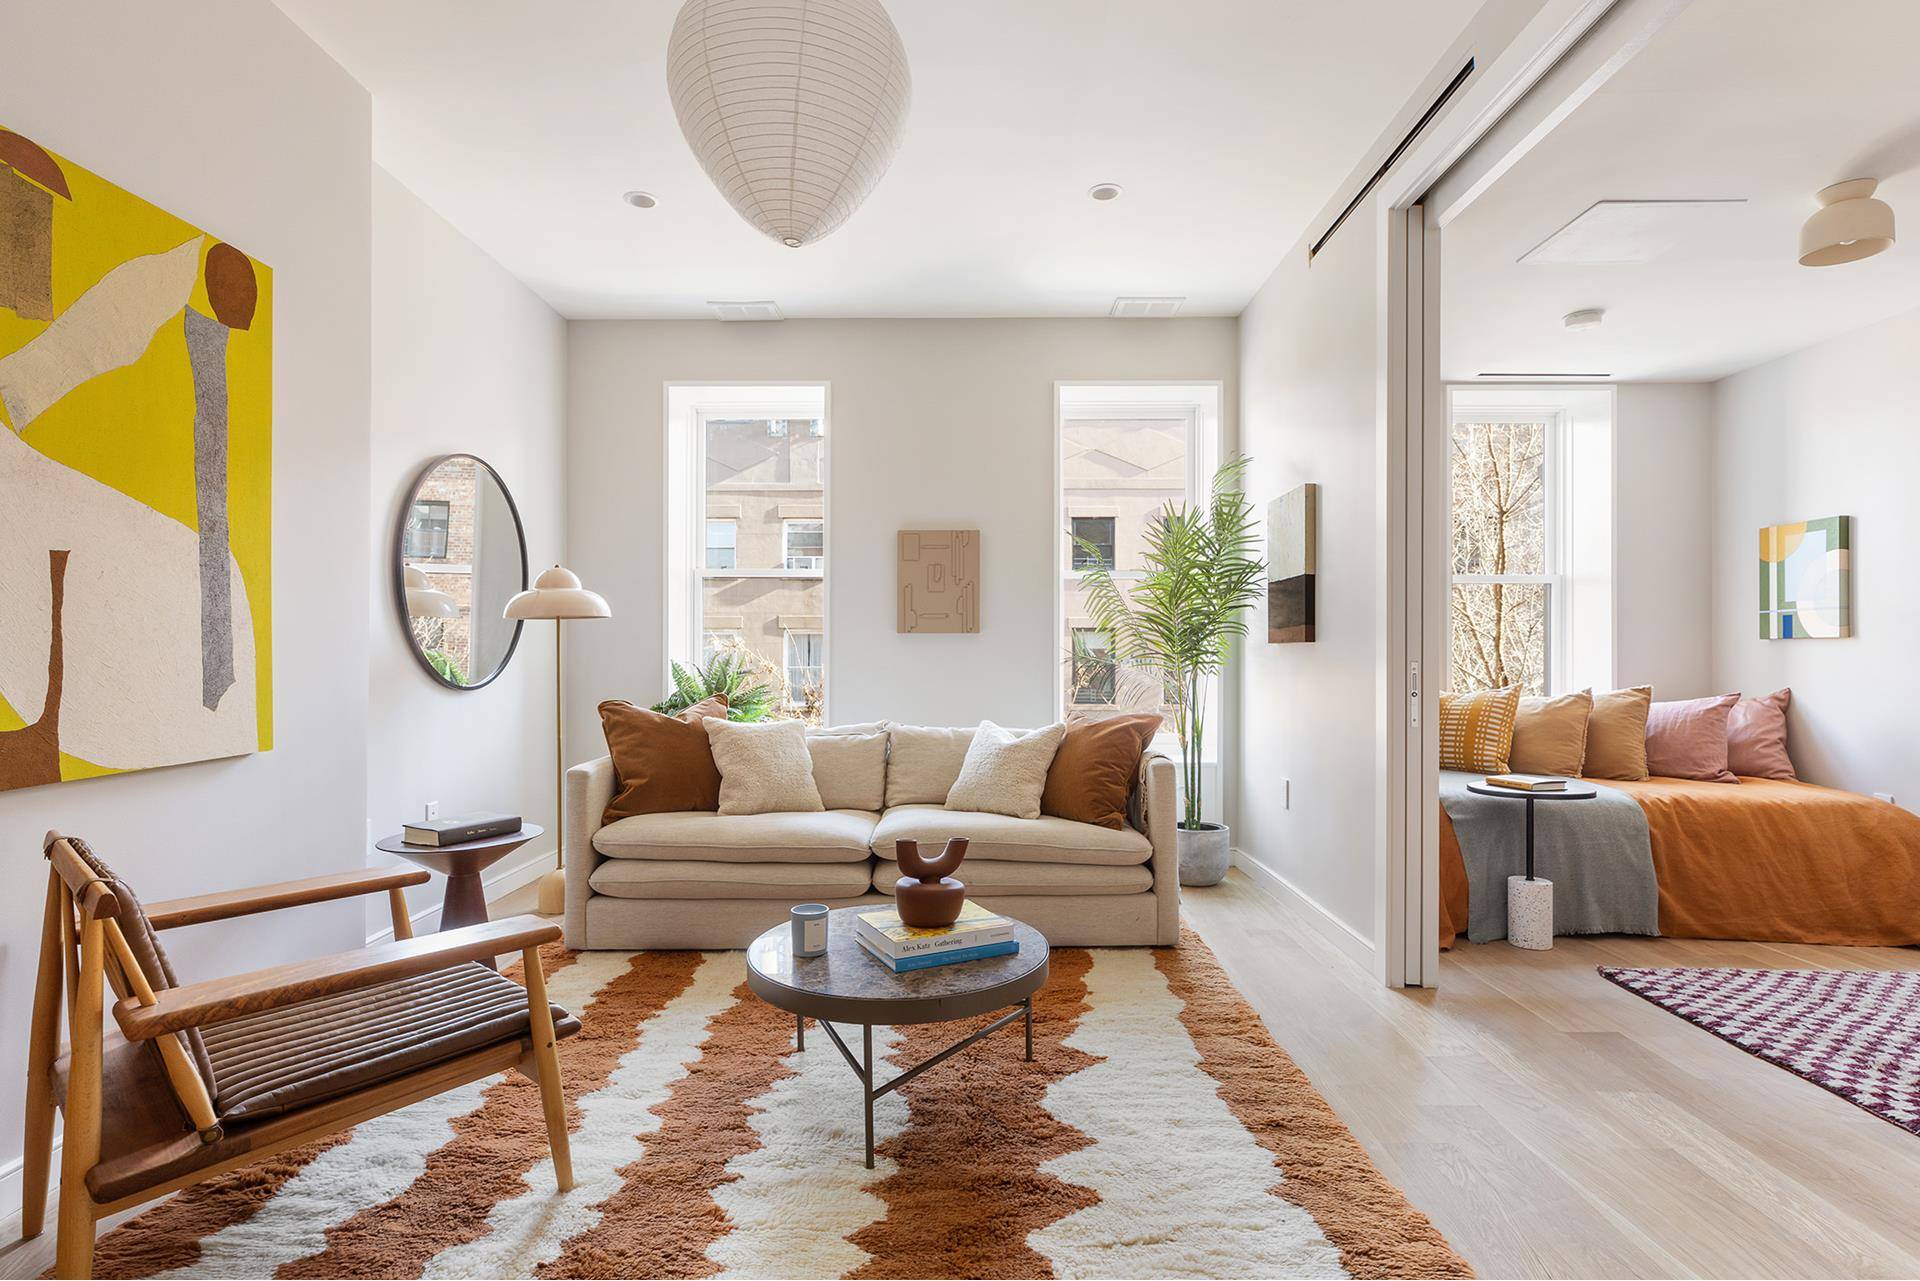 Introducing a luxurious living experience in the heart of Carroll Gardens, where modern elegance meets thoughtful design.